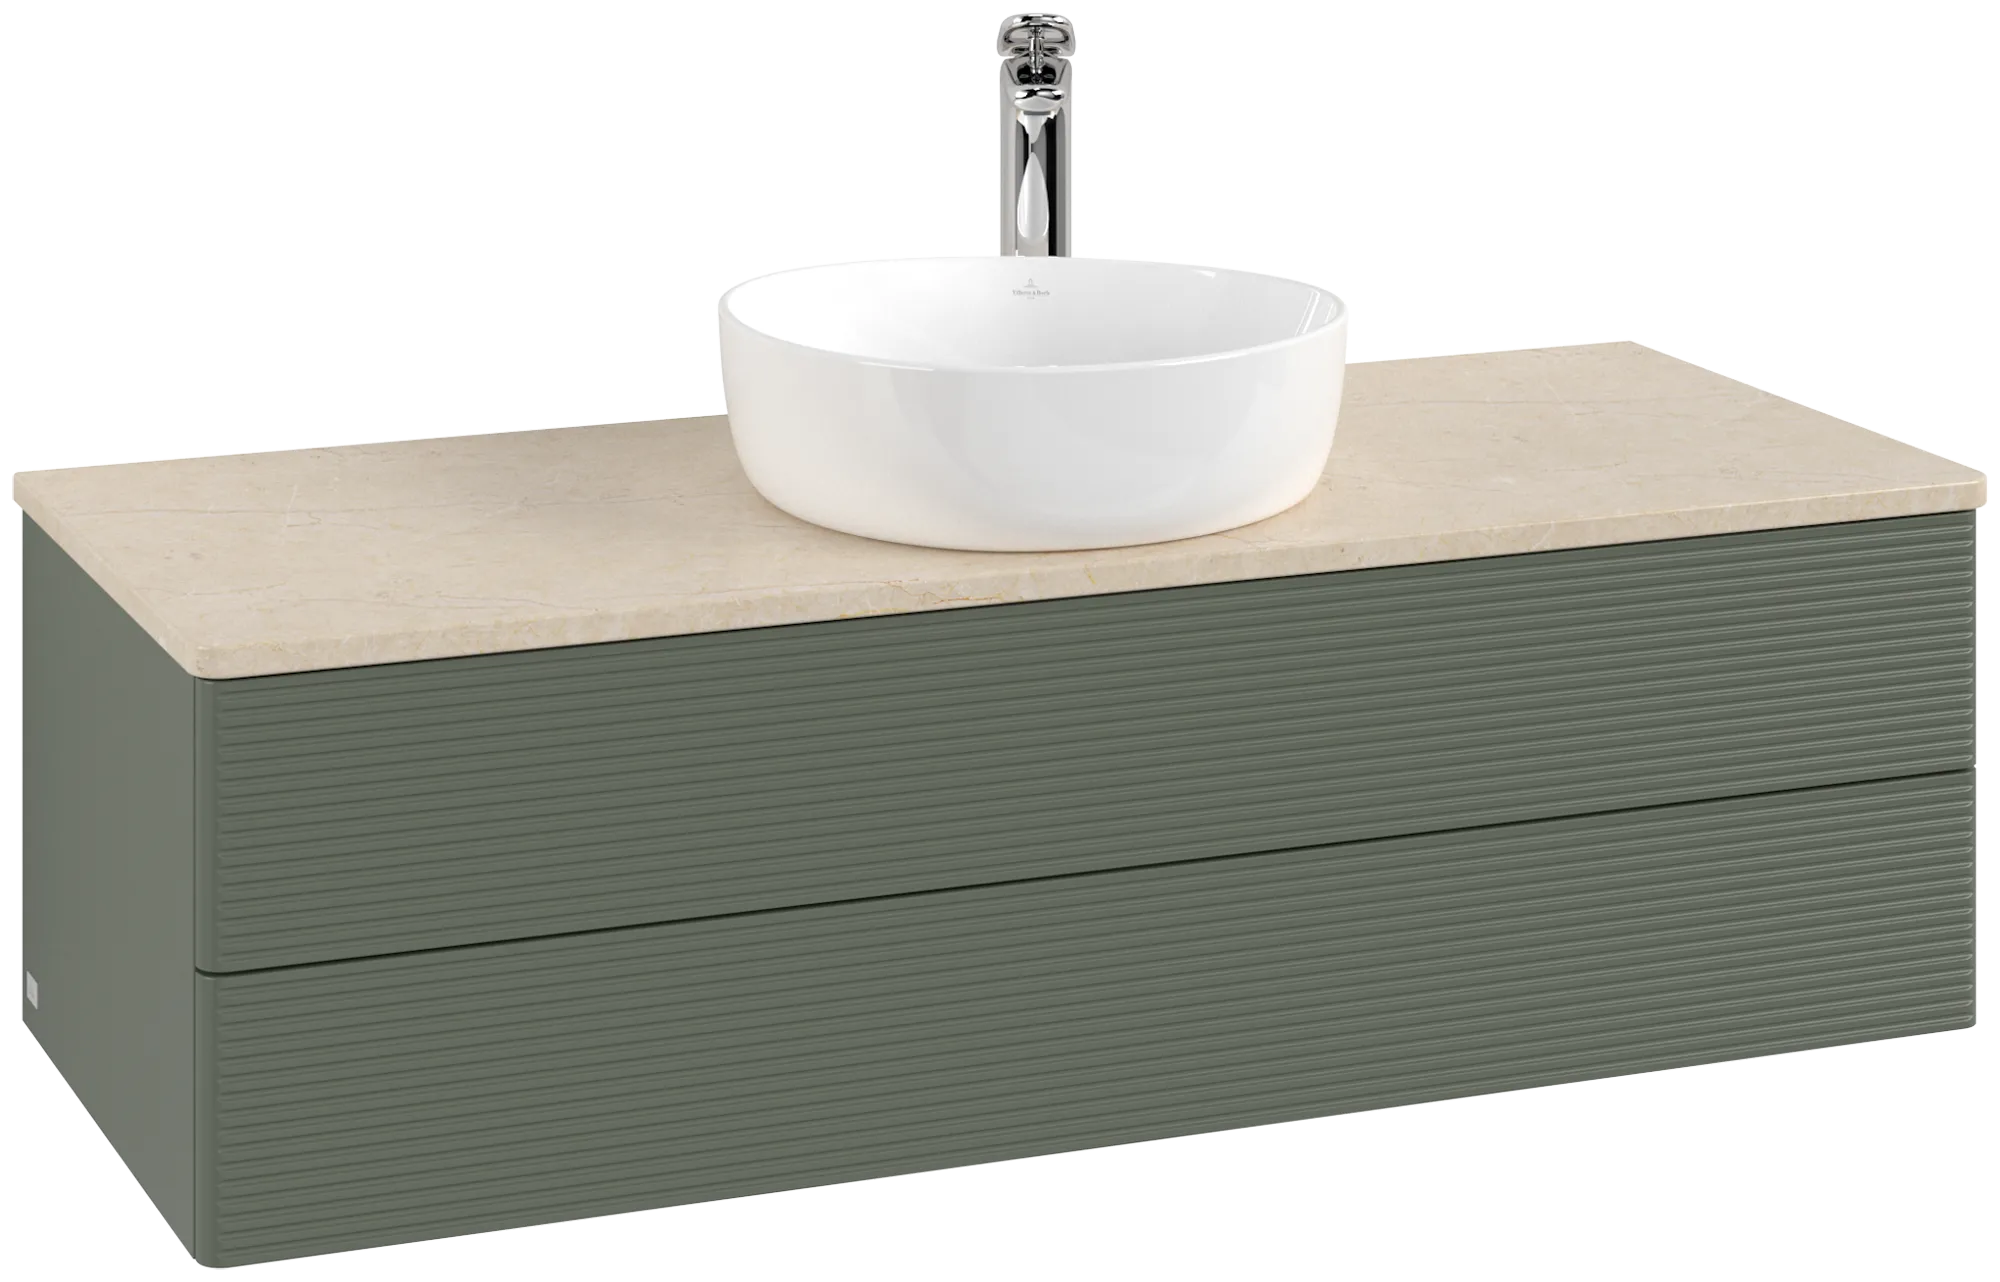 Picture of VILLEROY BOCH Antao Vanity unit, 2 pull-out compartments, 1200 x 360 x 500 mm, Front with grain texture, Leaf Green Matt Lacquer / Botticino #K21153HL